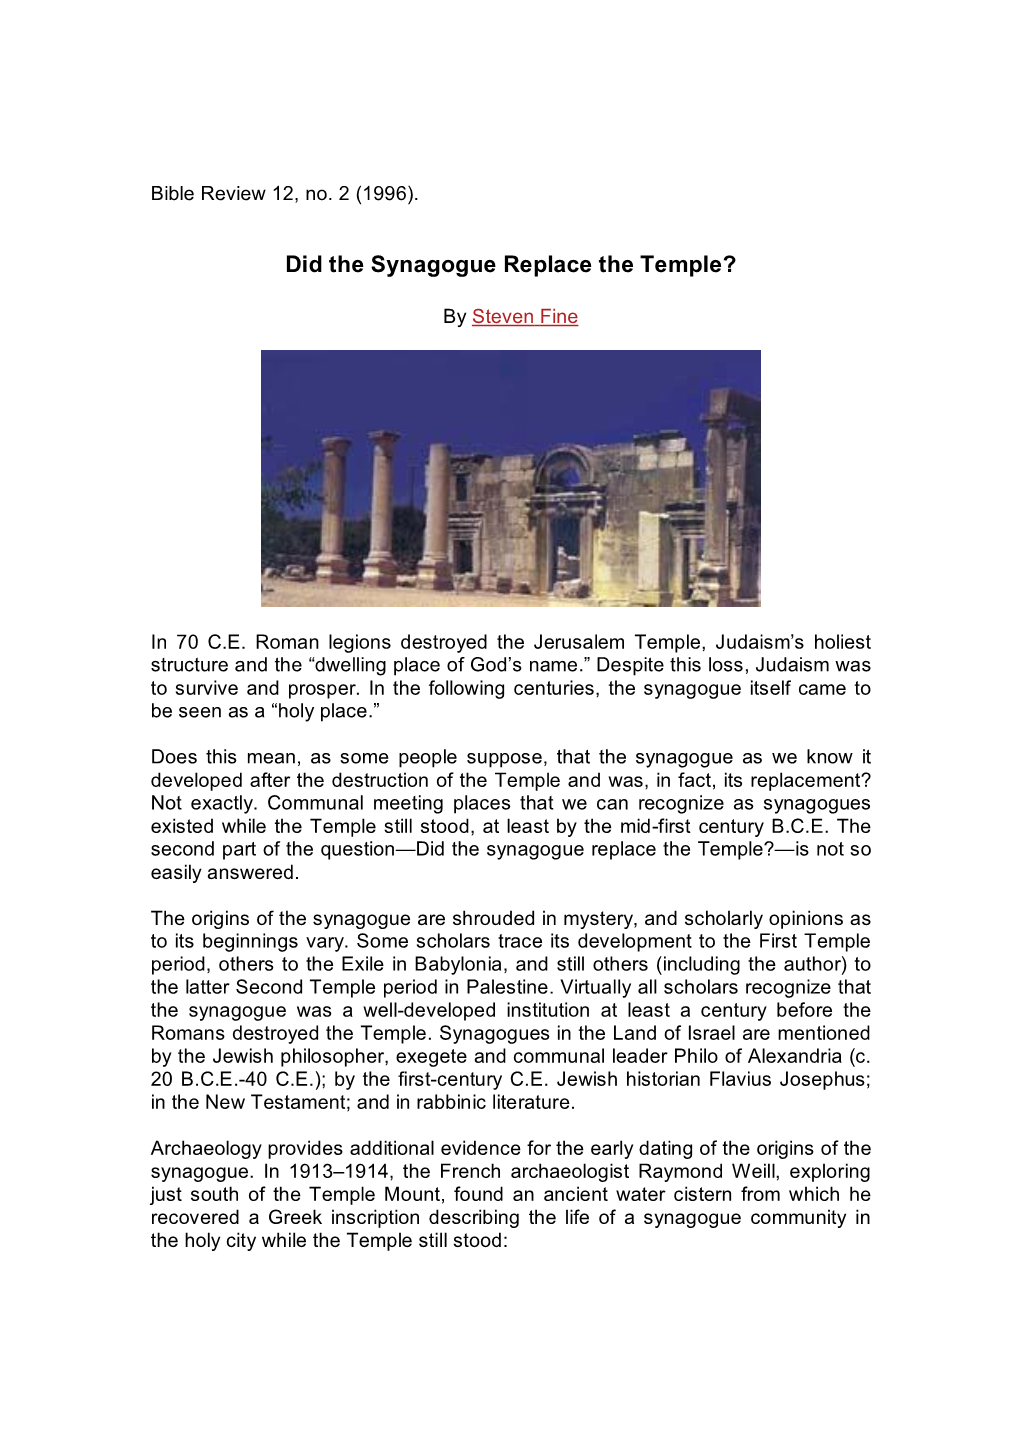 Did the Synagogue Replace the Temple?